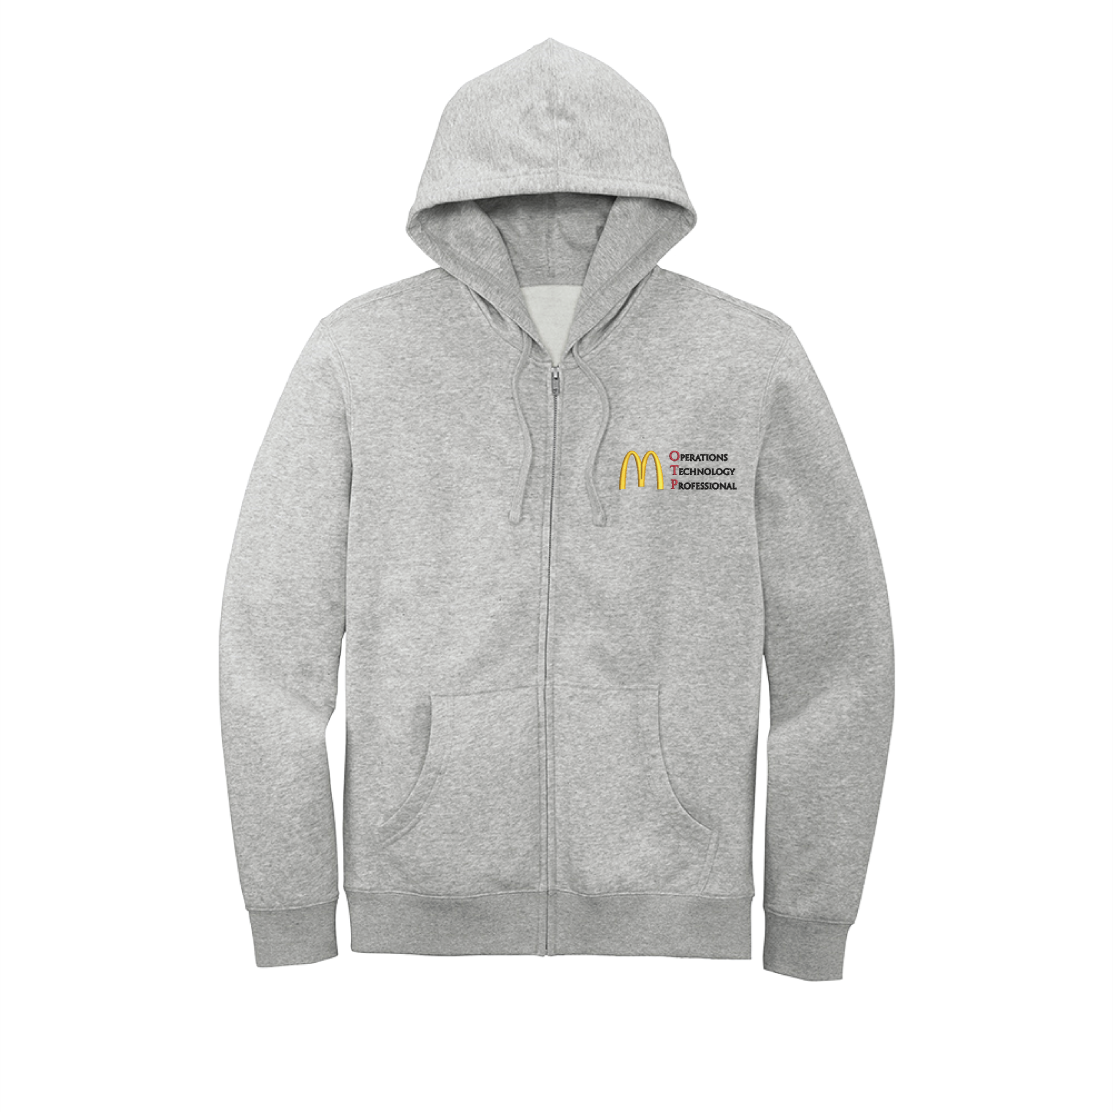 OTP Pro Full Zip Hoodie - Smilemakers | McDonald's approved vendor for ...